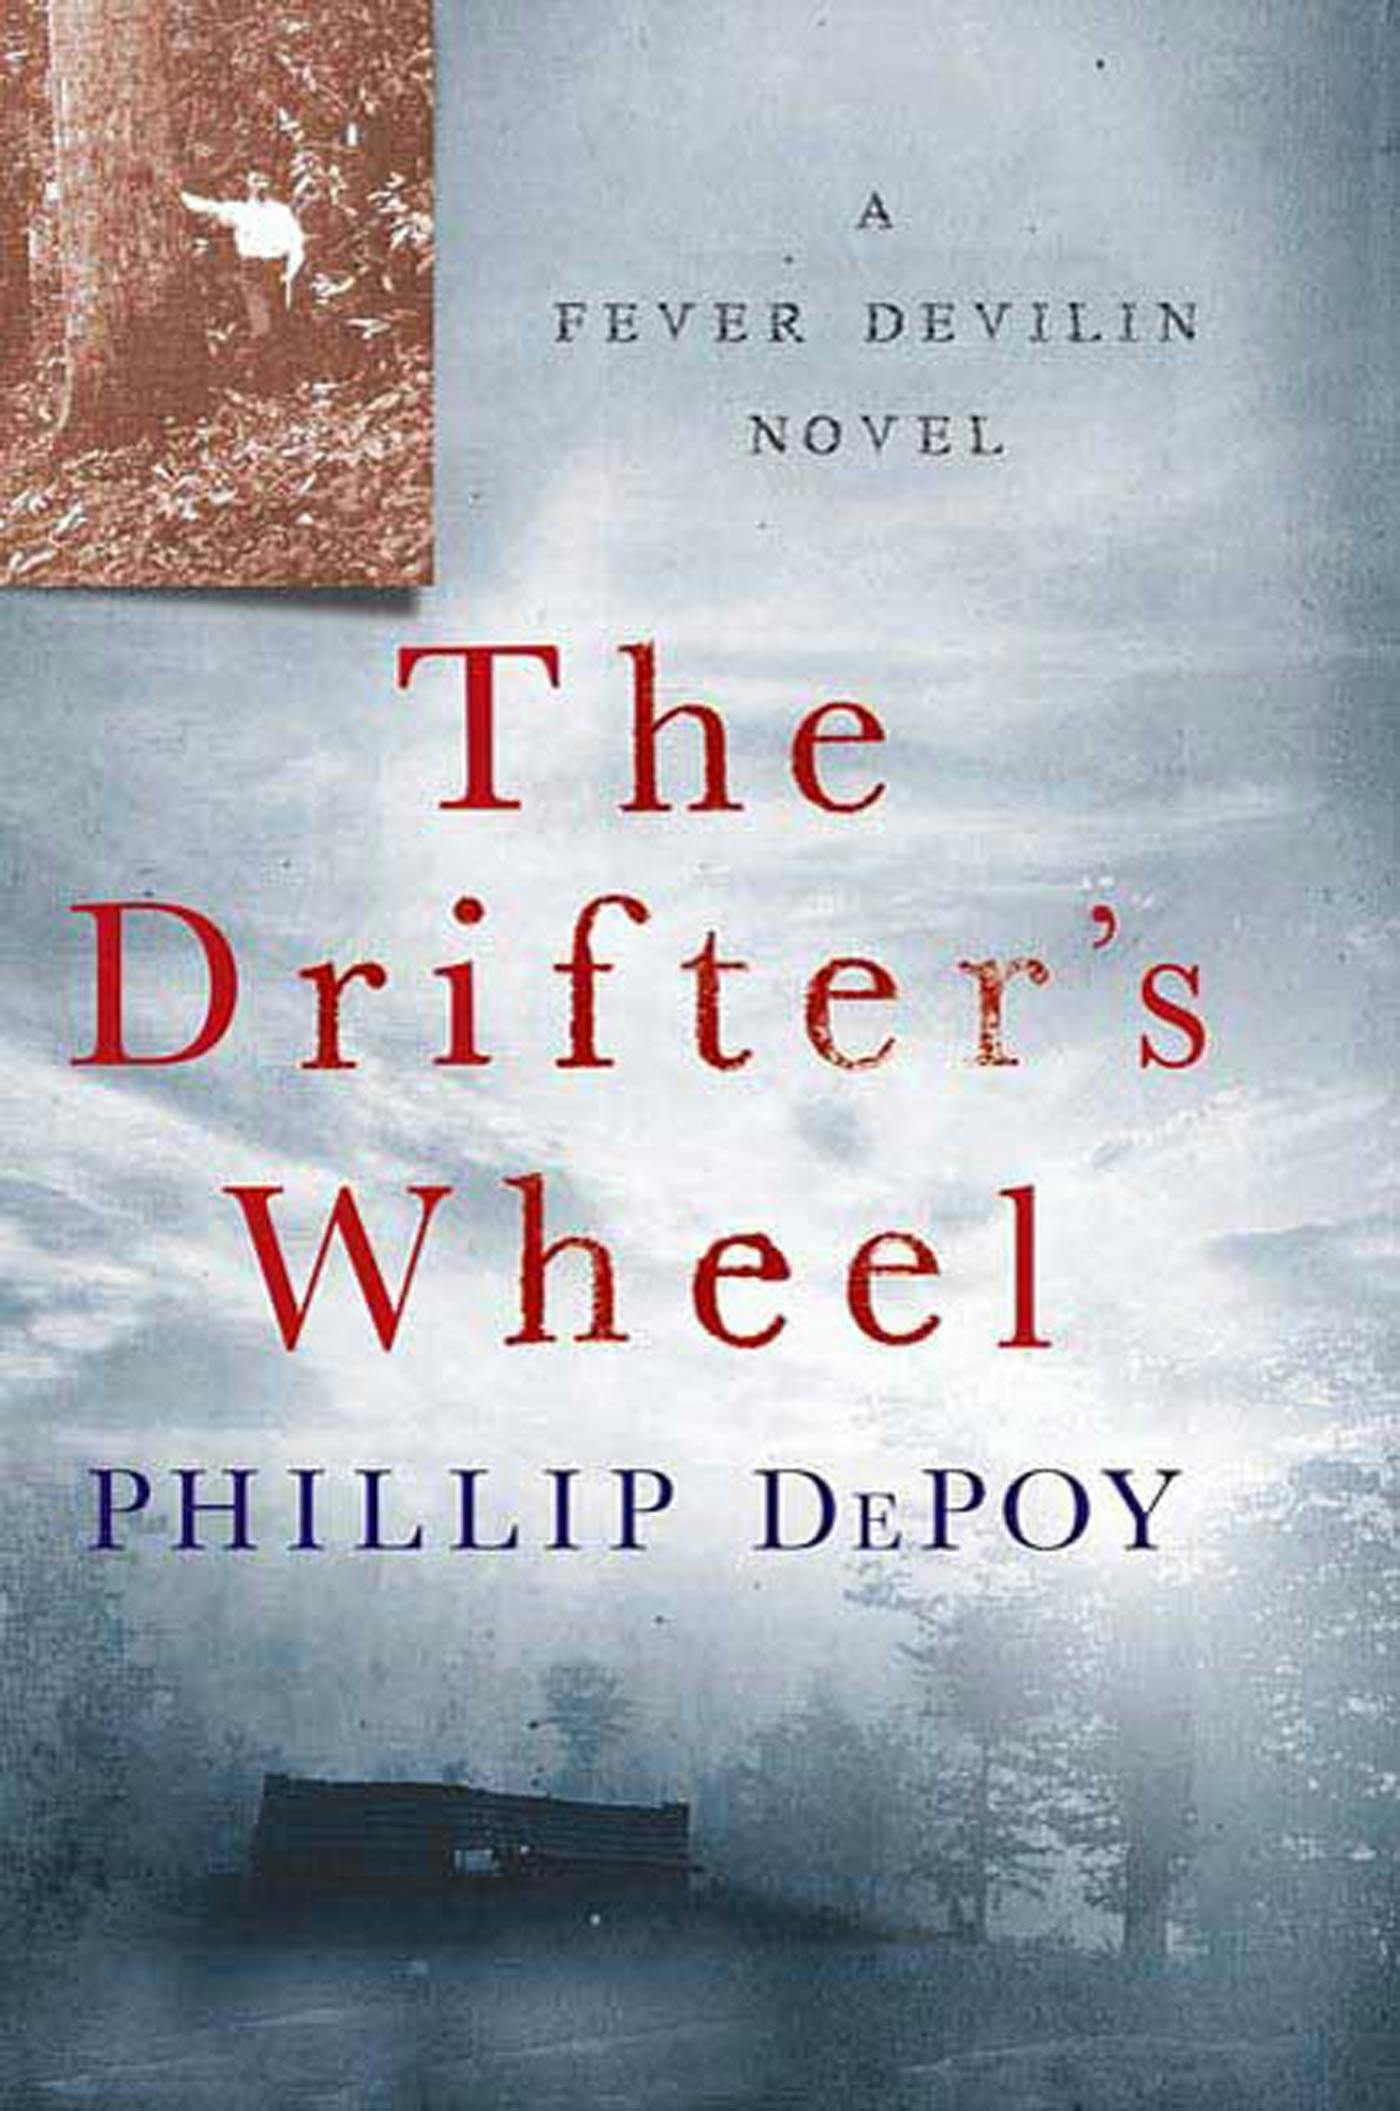 Image of The Drifter's Wheel